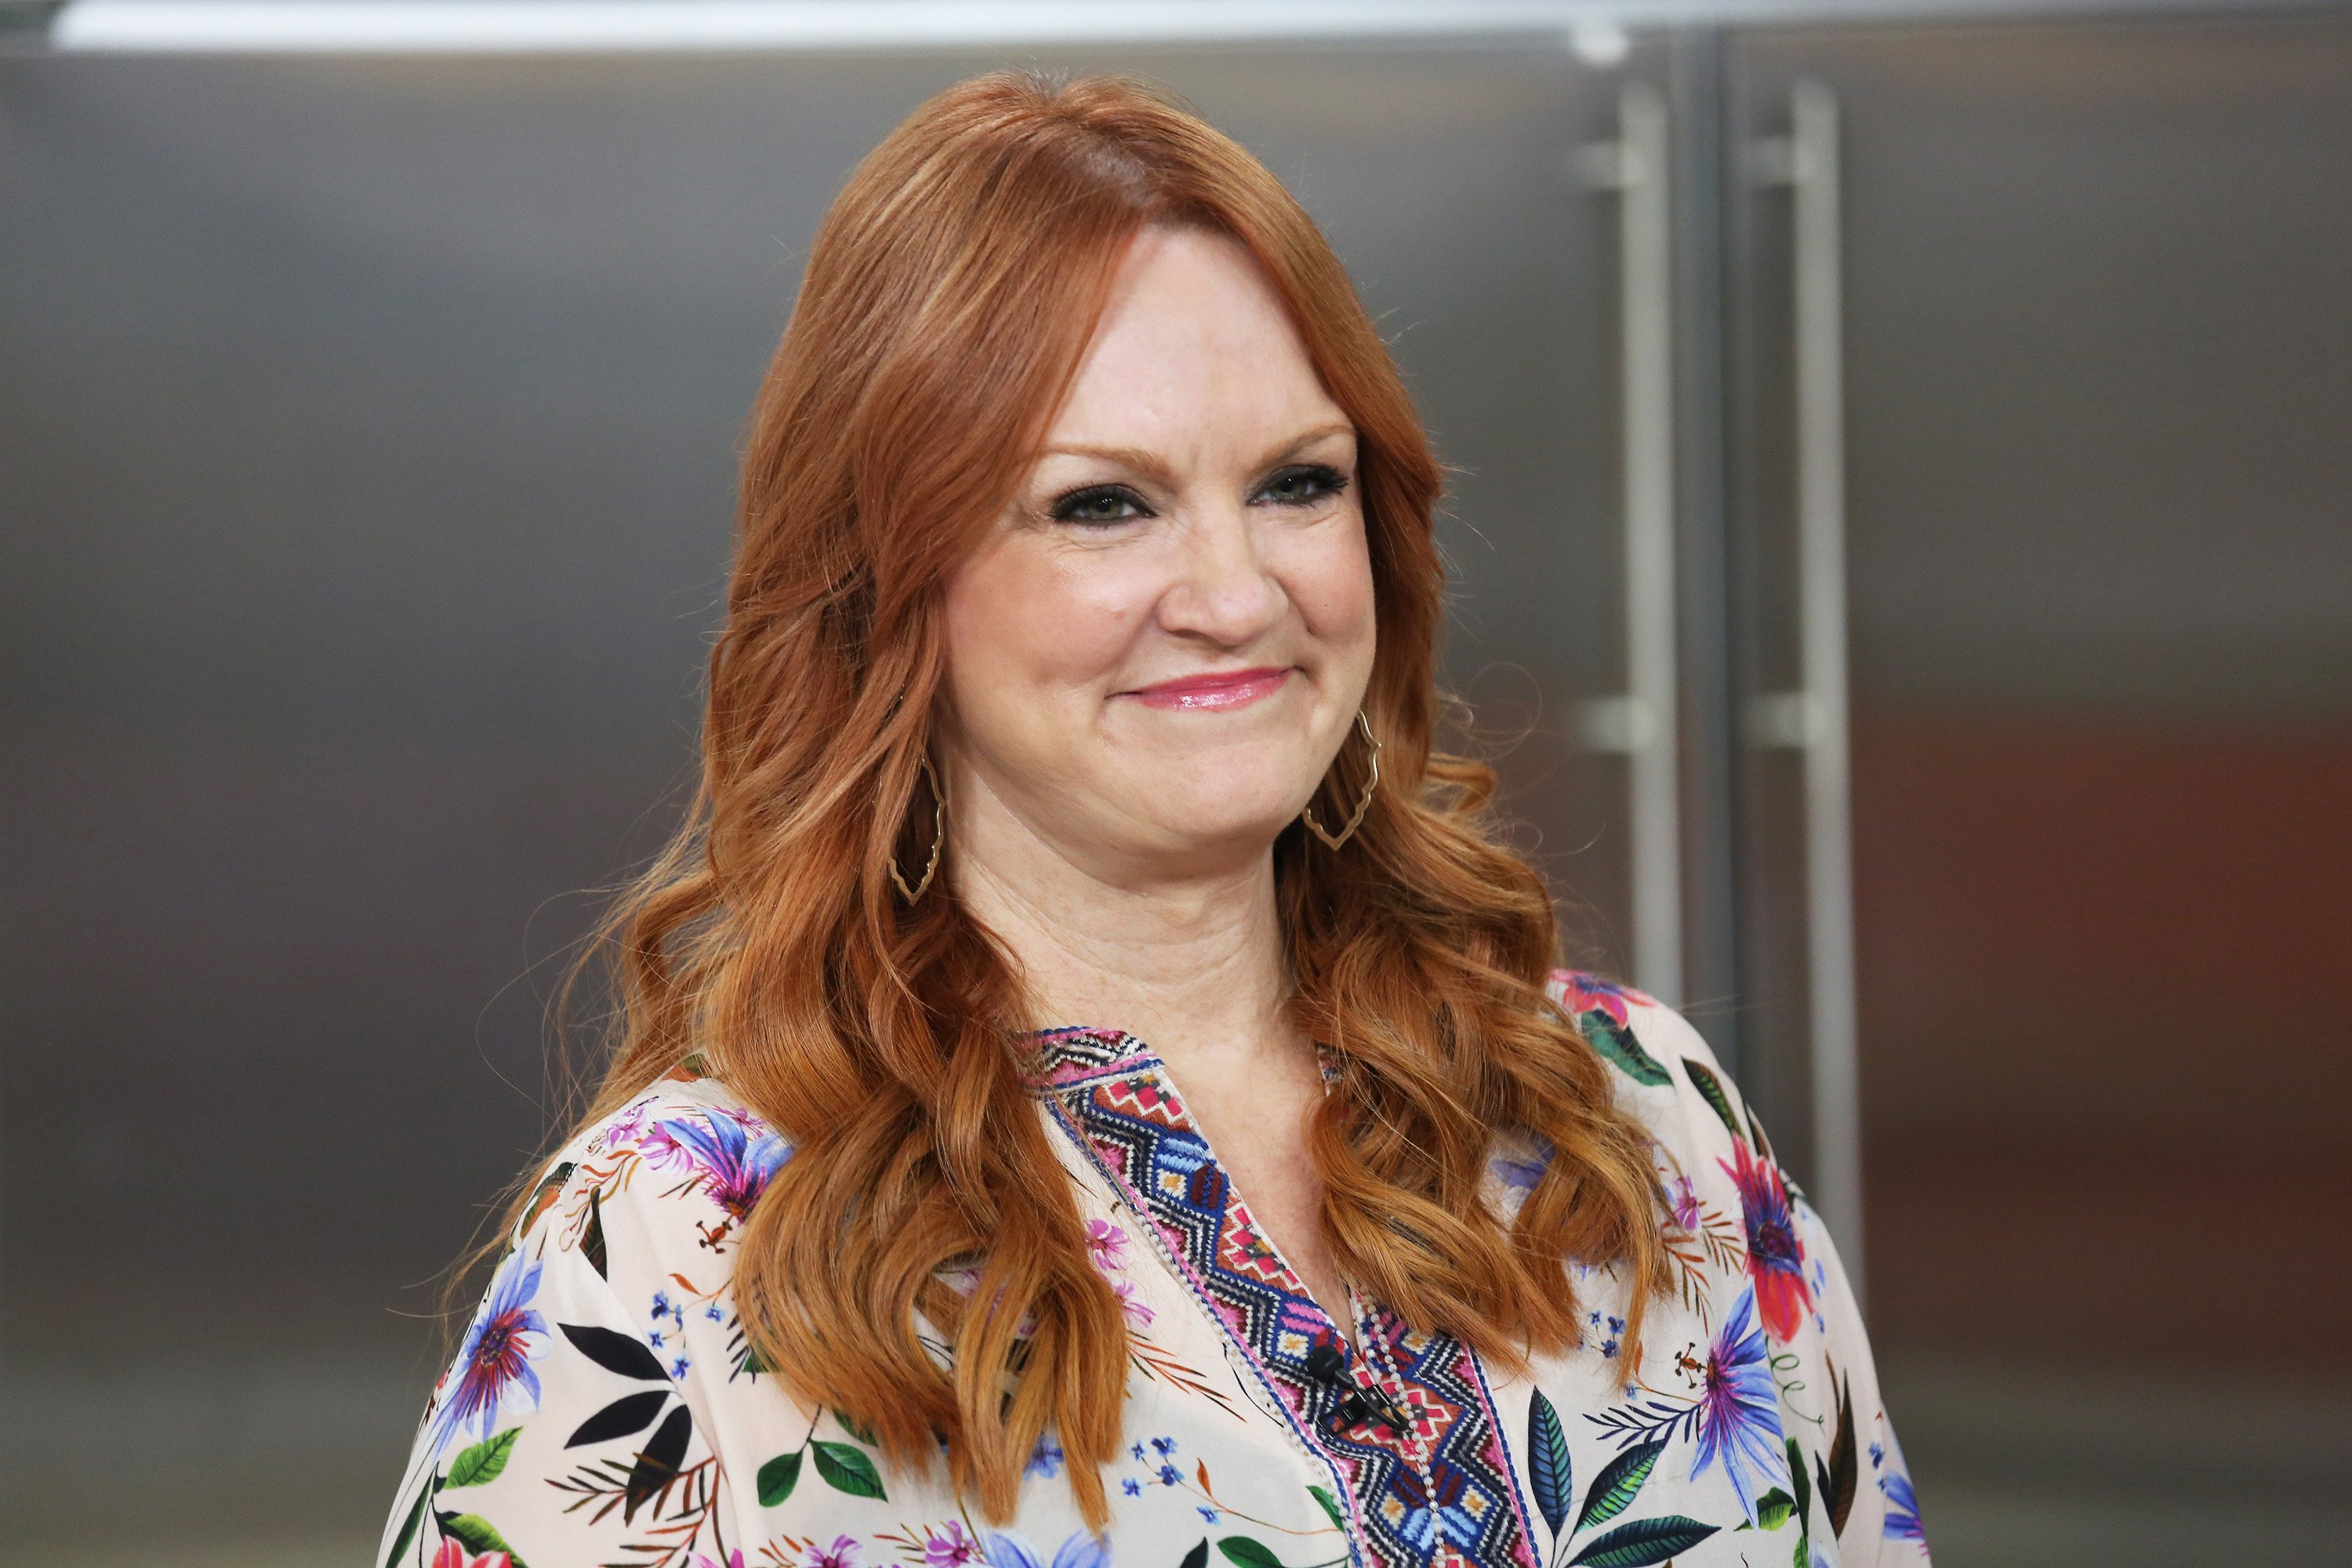 Ree Drummond smiles while wearing a colorful blouse